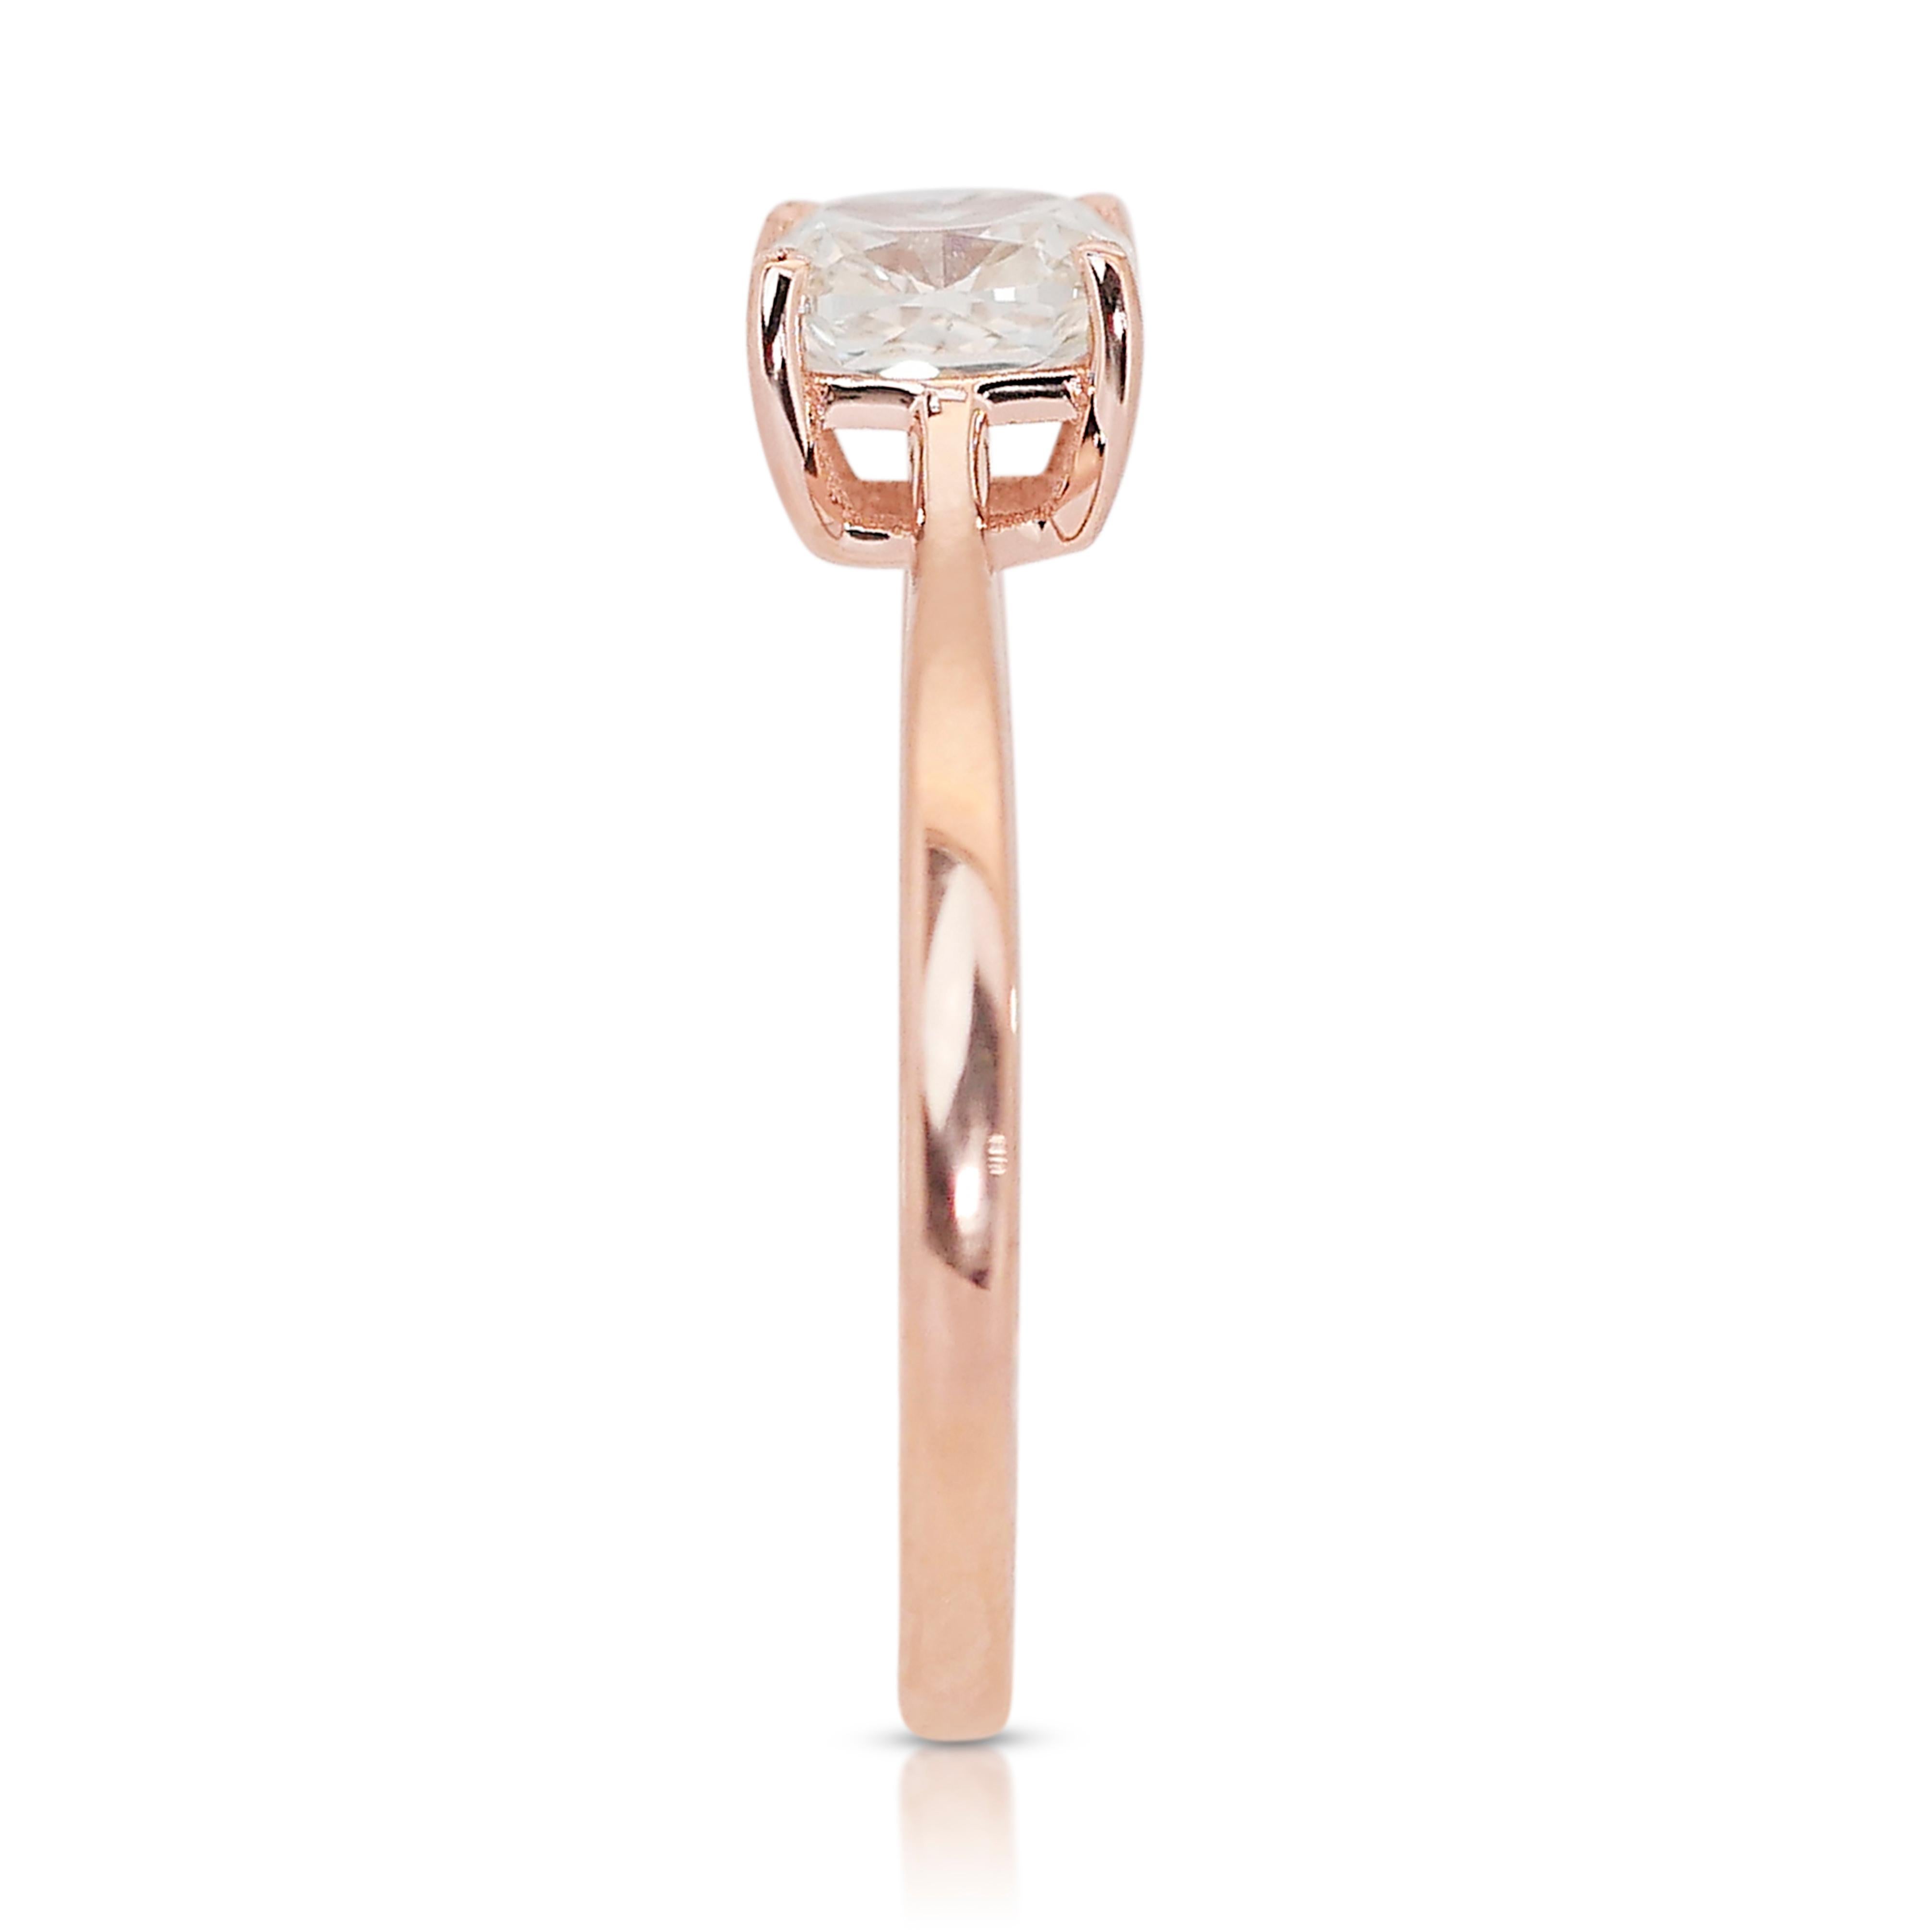 Lustrous 18K Rose Gold Solitaire Natural Diamond Ring w/1.05ct - IGI Certified 1